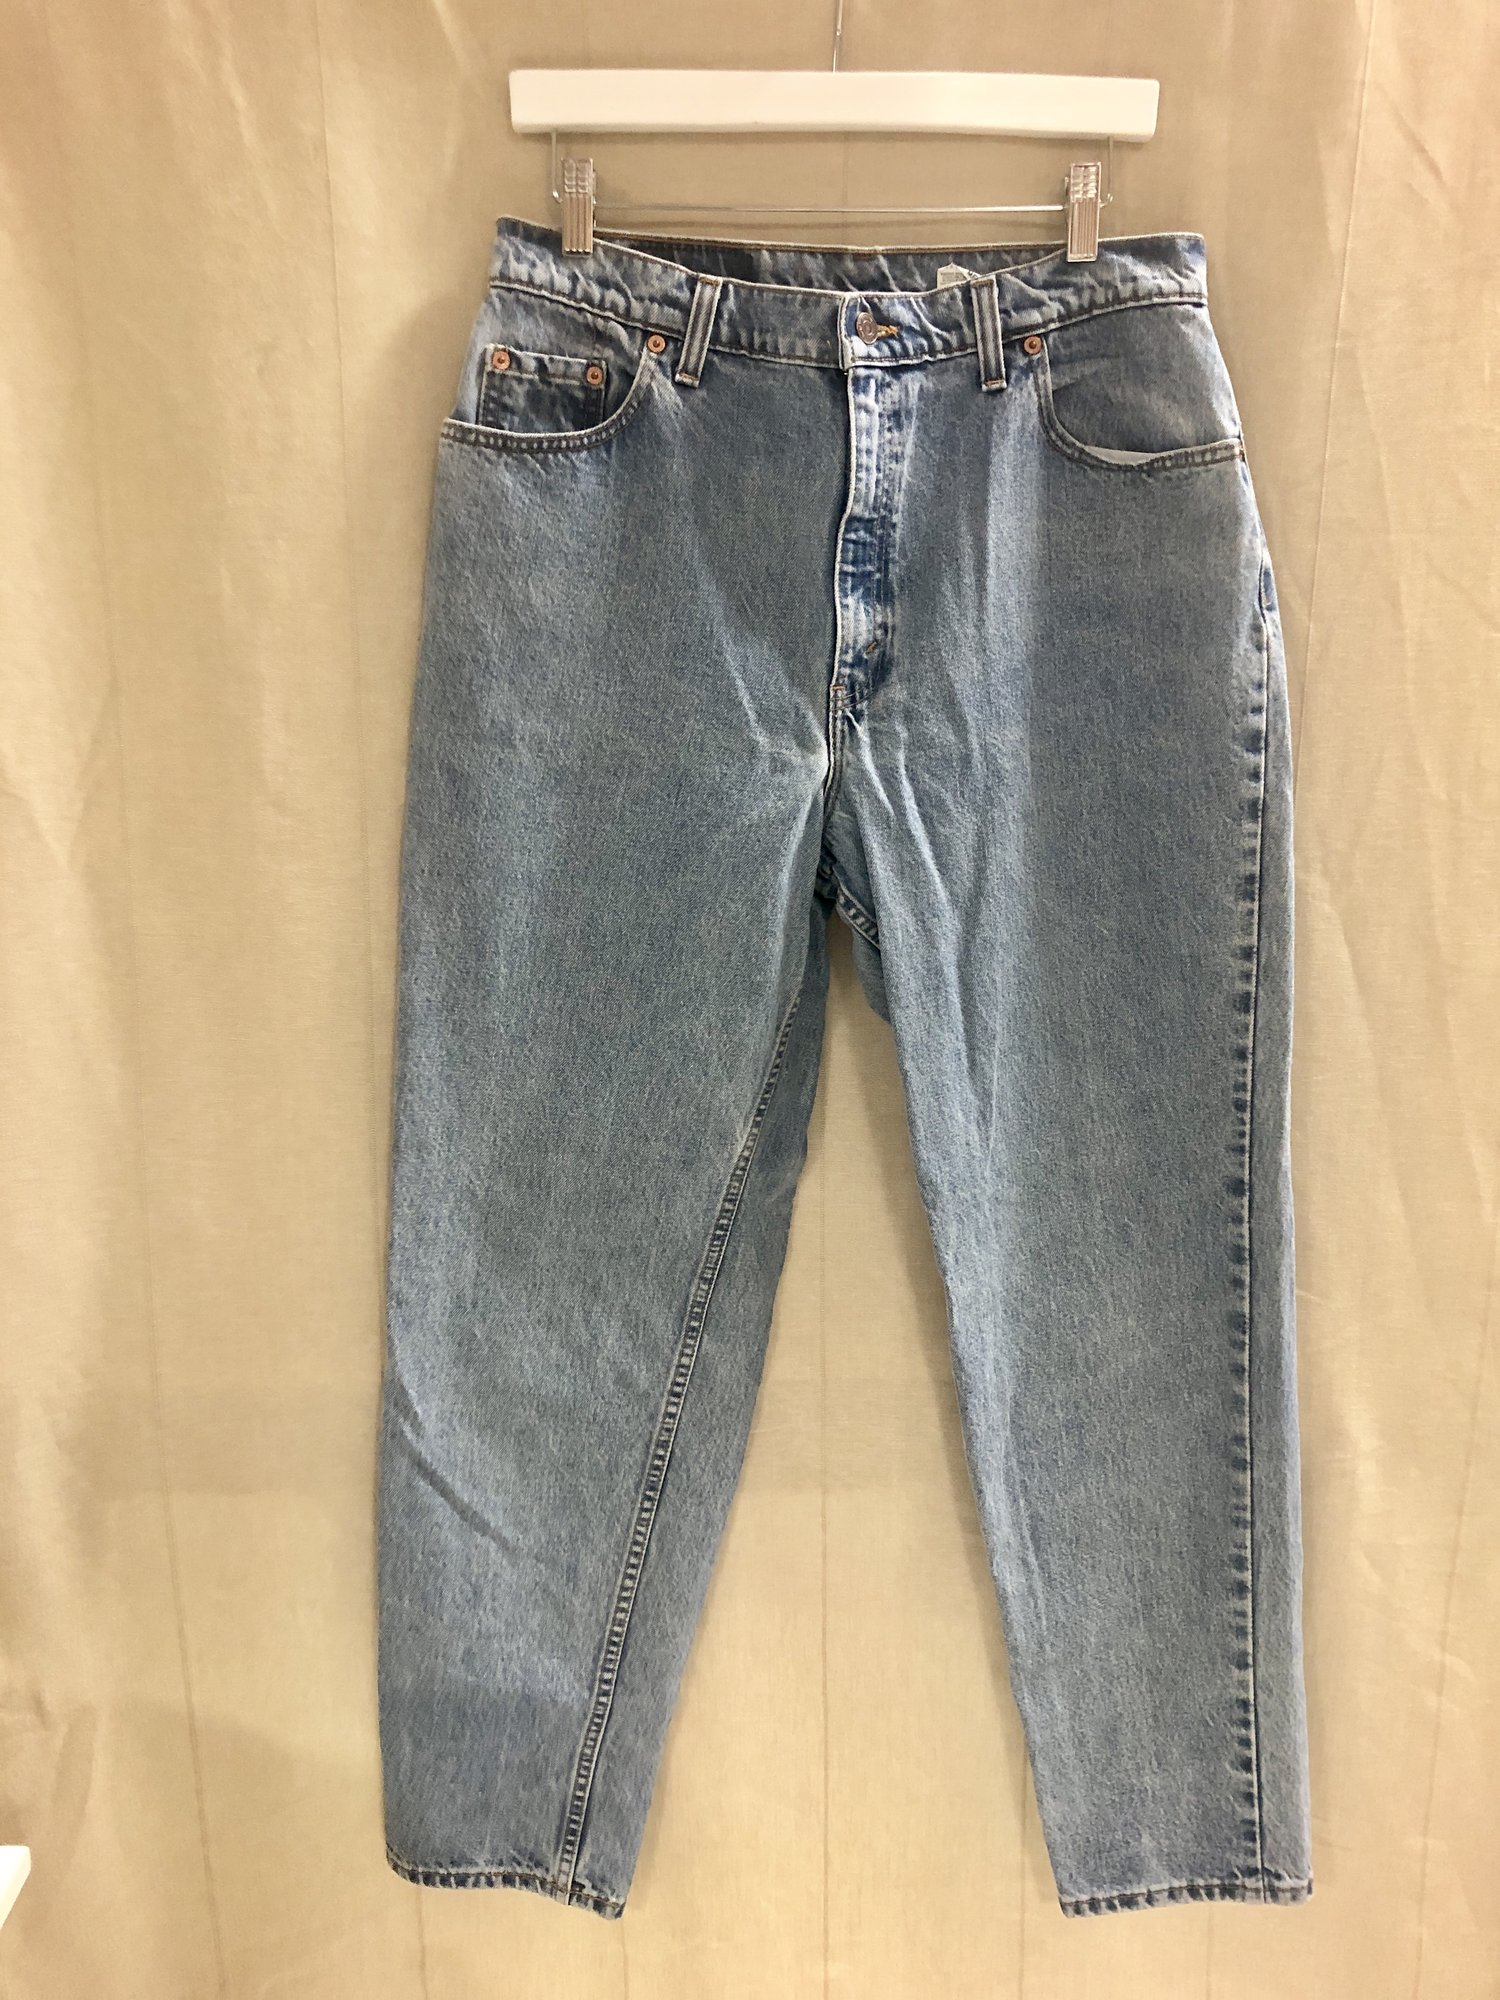 THIRD SISTER VINTAGE Levi's - Stitched Up